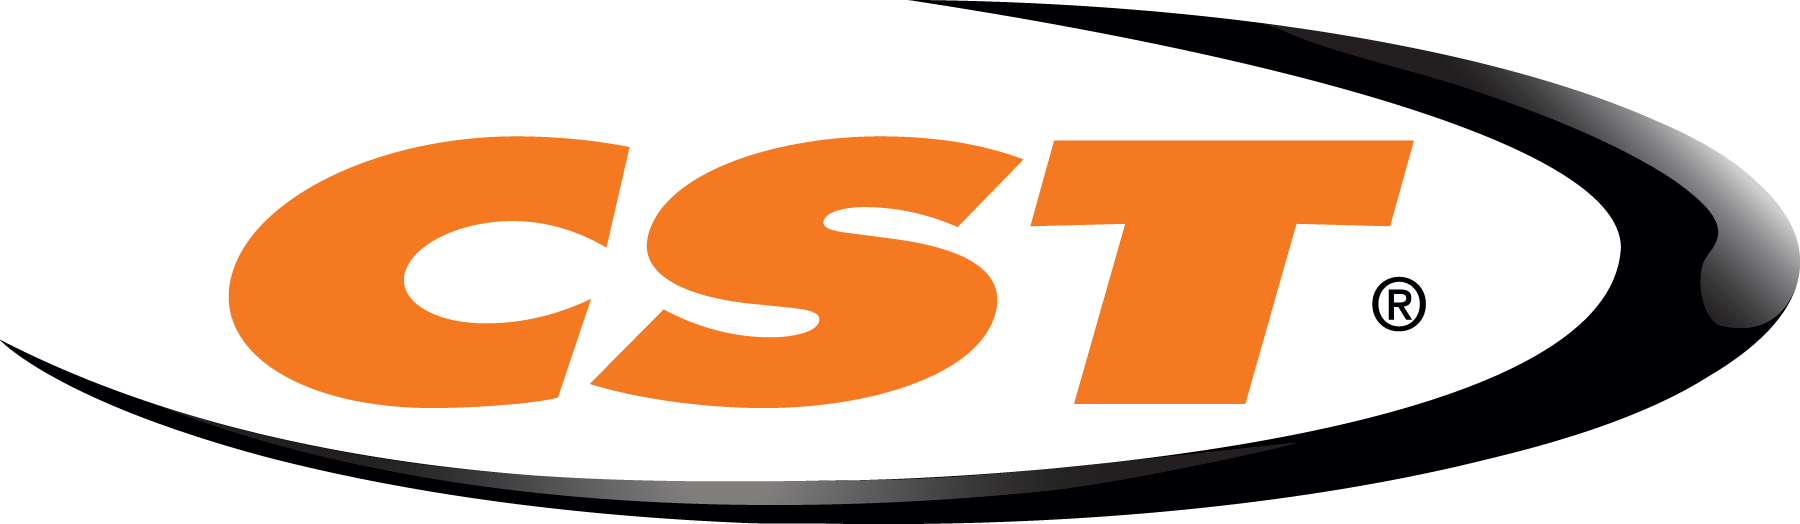 Continuing Its Growth As A Powerful Global Tire Brand, - Cst Logo Png (1800x524)